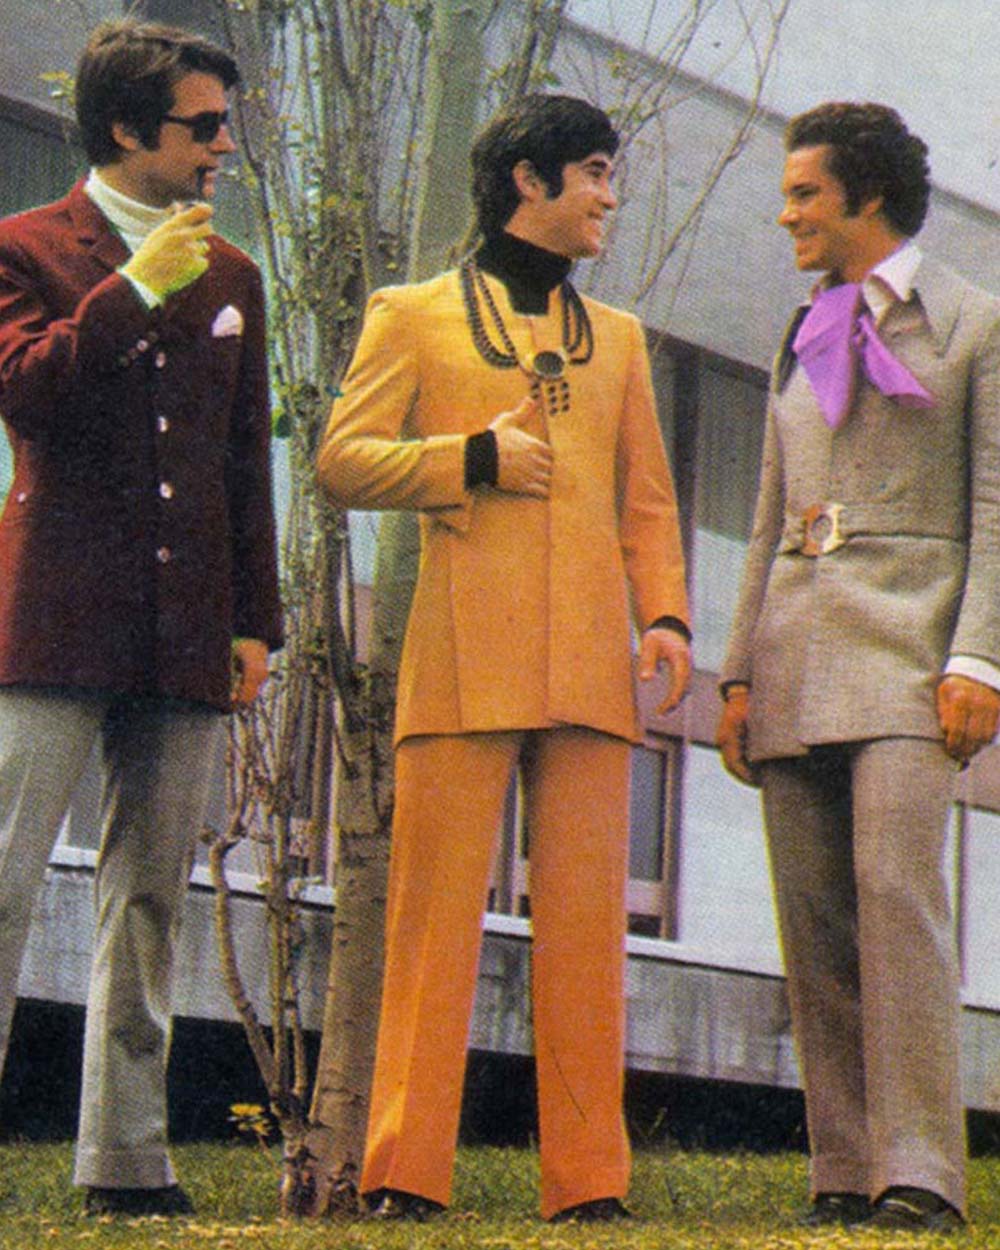 men in 1970s wearing colorful suits